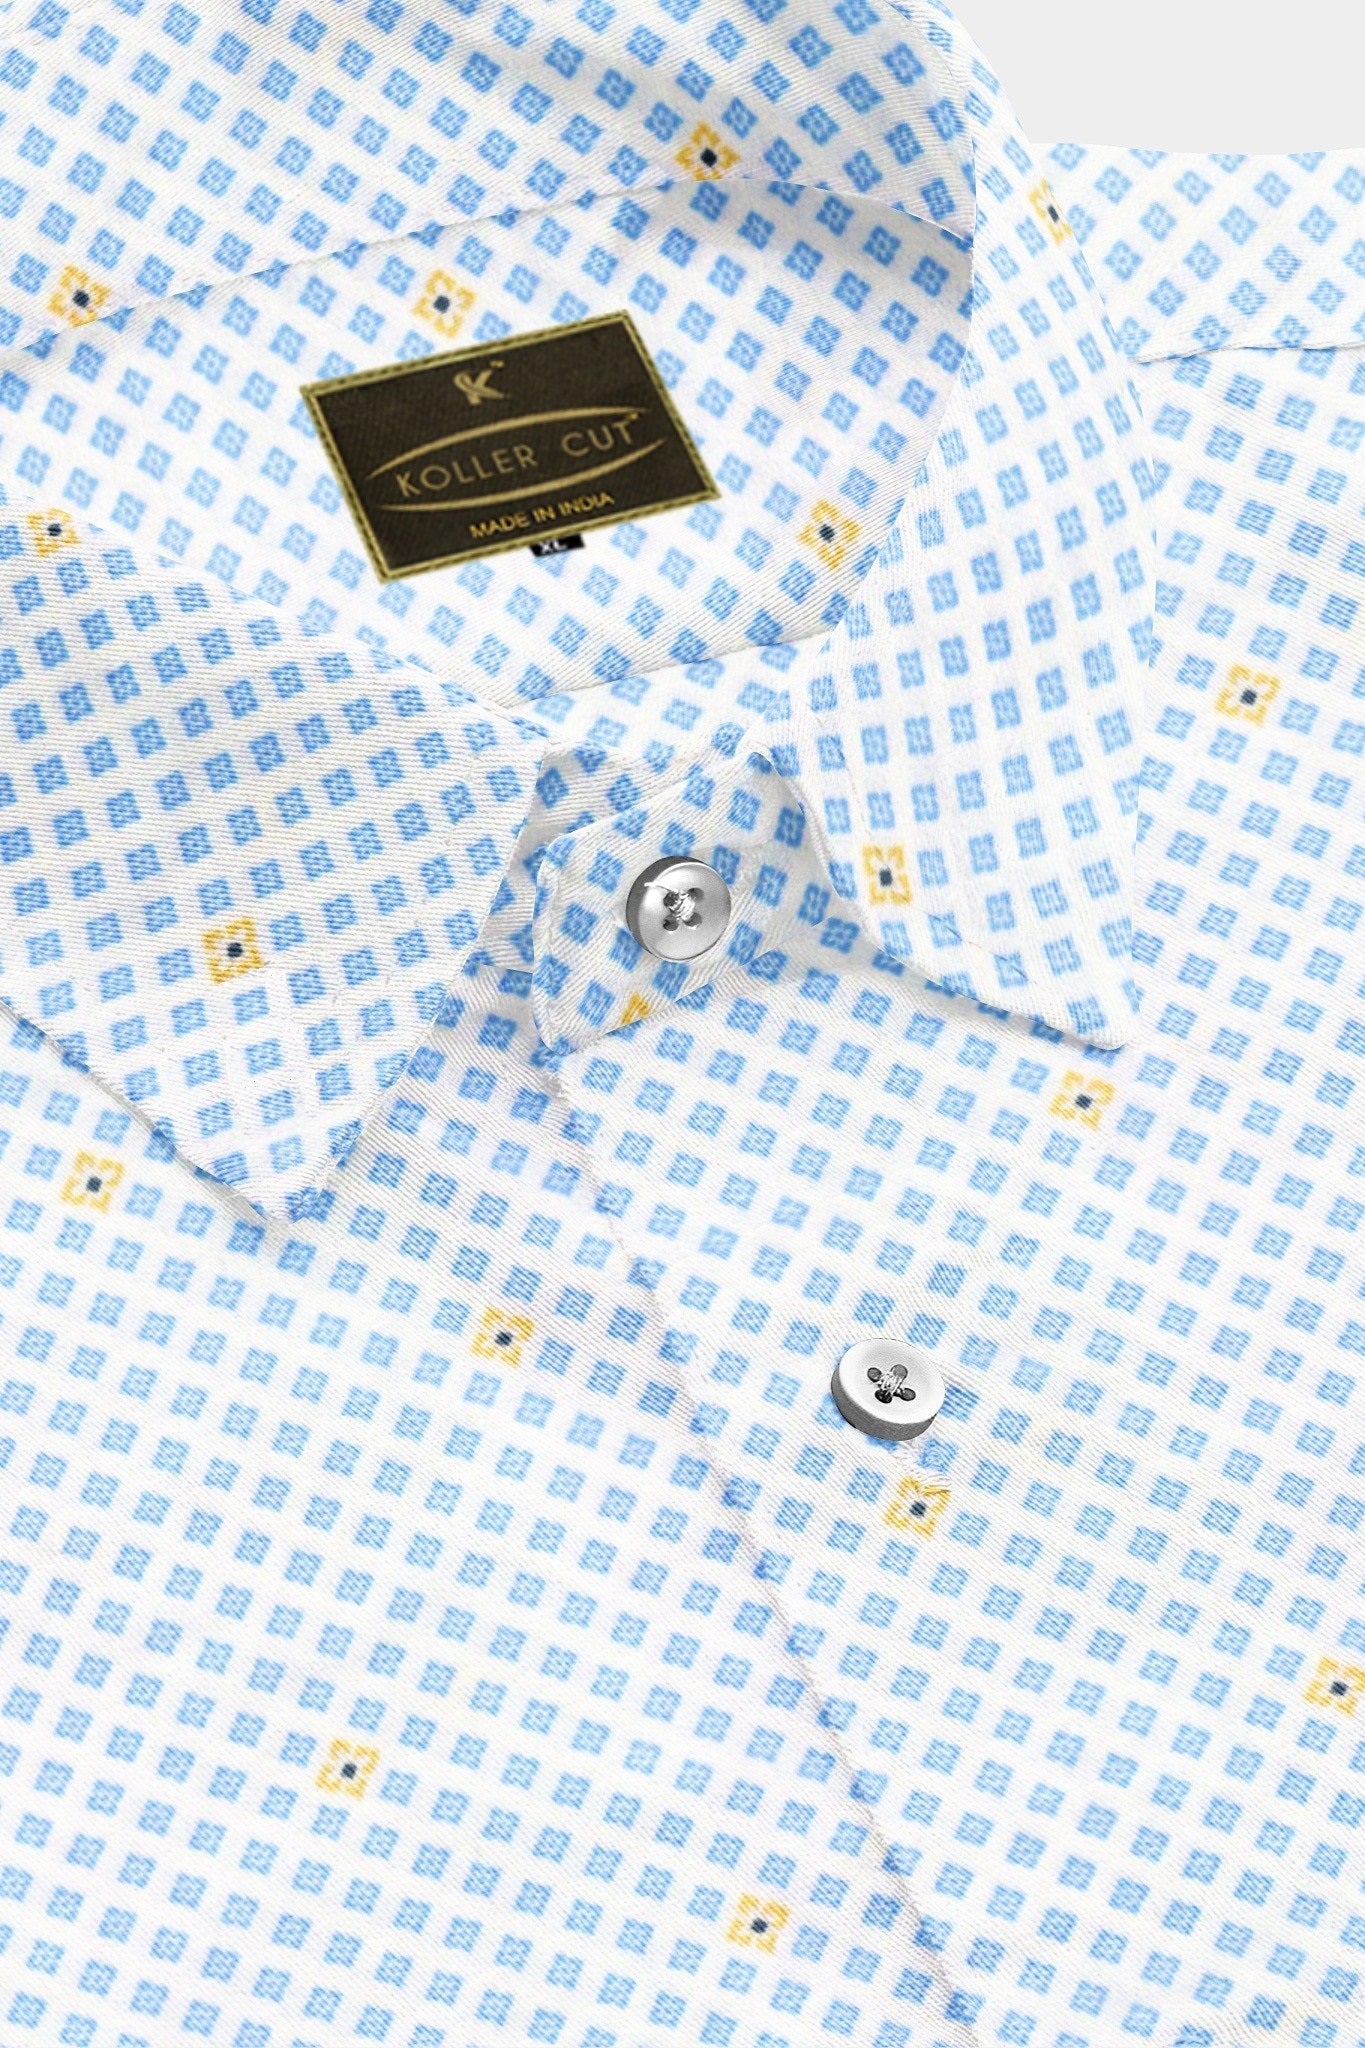 White with Sky-blue and Golden Diamond Printed Men's Cotton Shirt